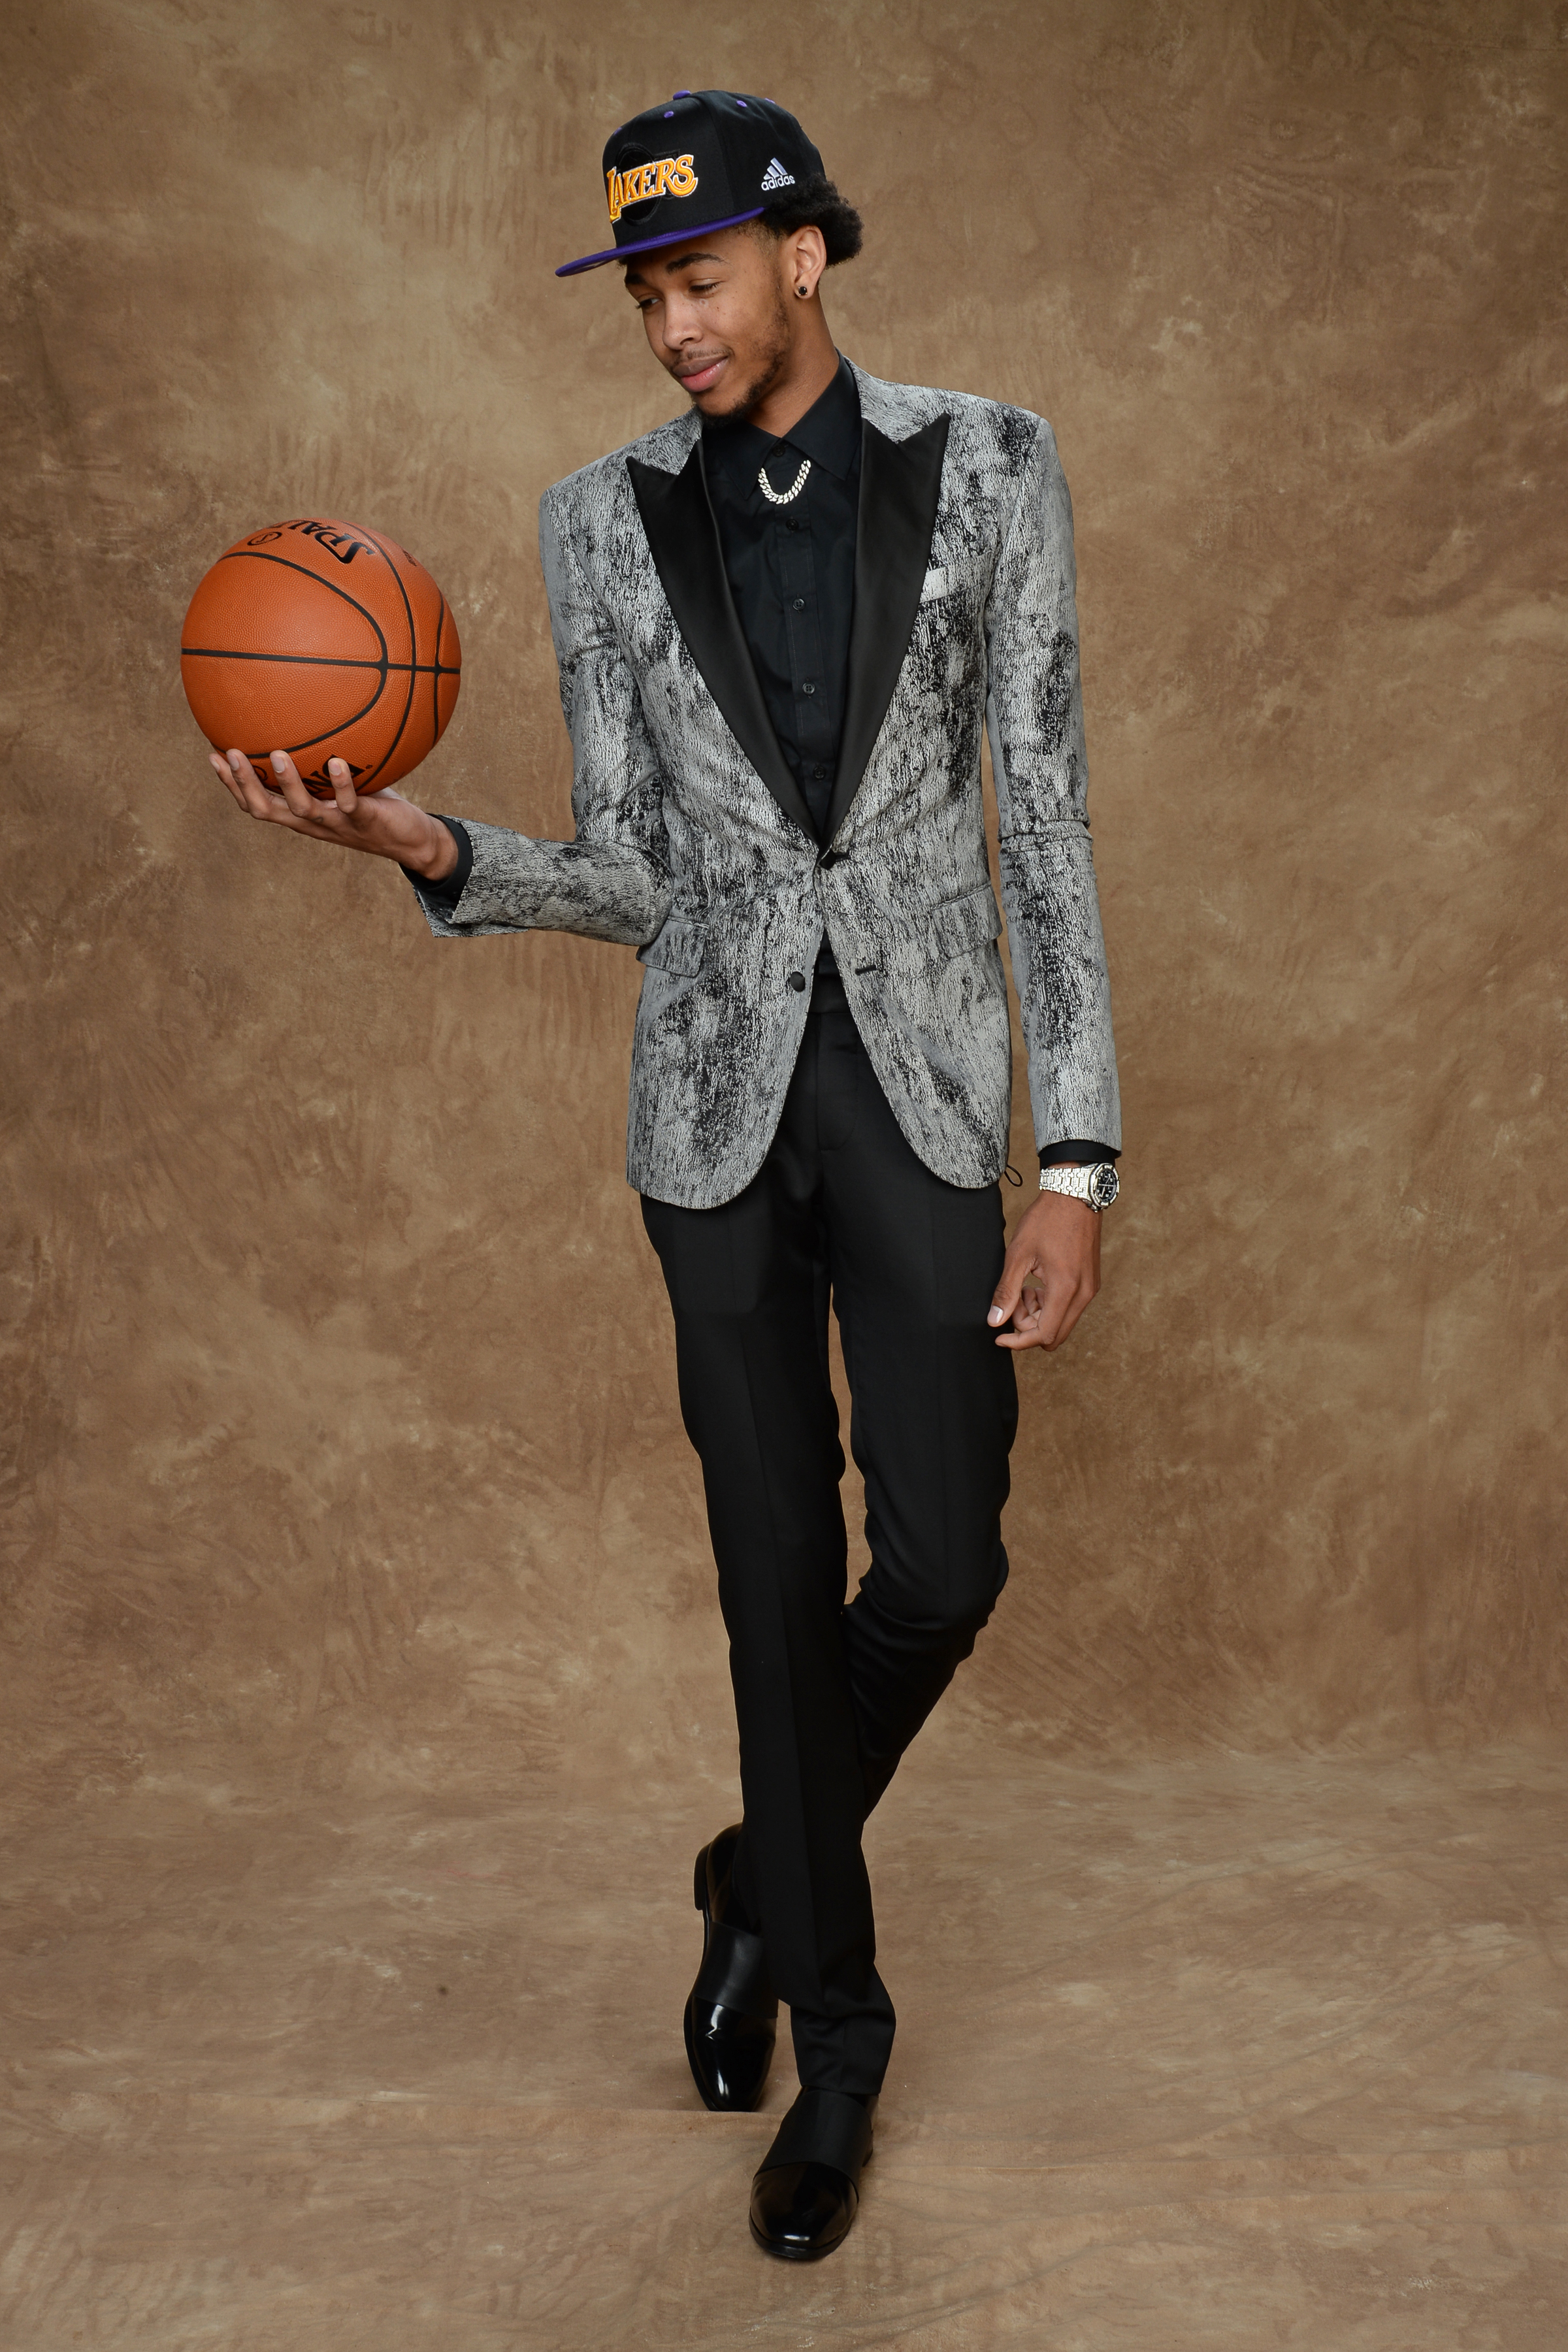 Brandon Ingram's flashy metallic suit cut a daring look at the draft, making him a perfect sartorial fit for star-studded Los Angeles.